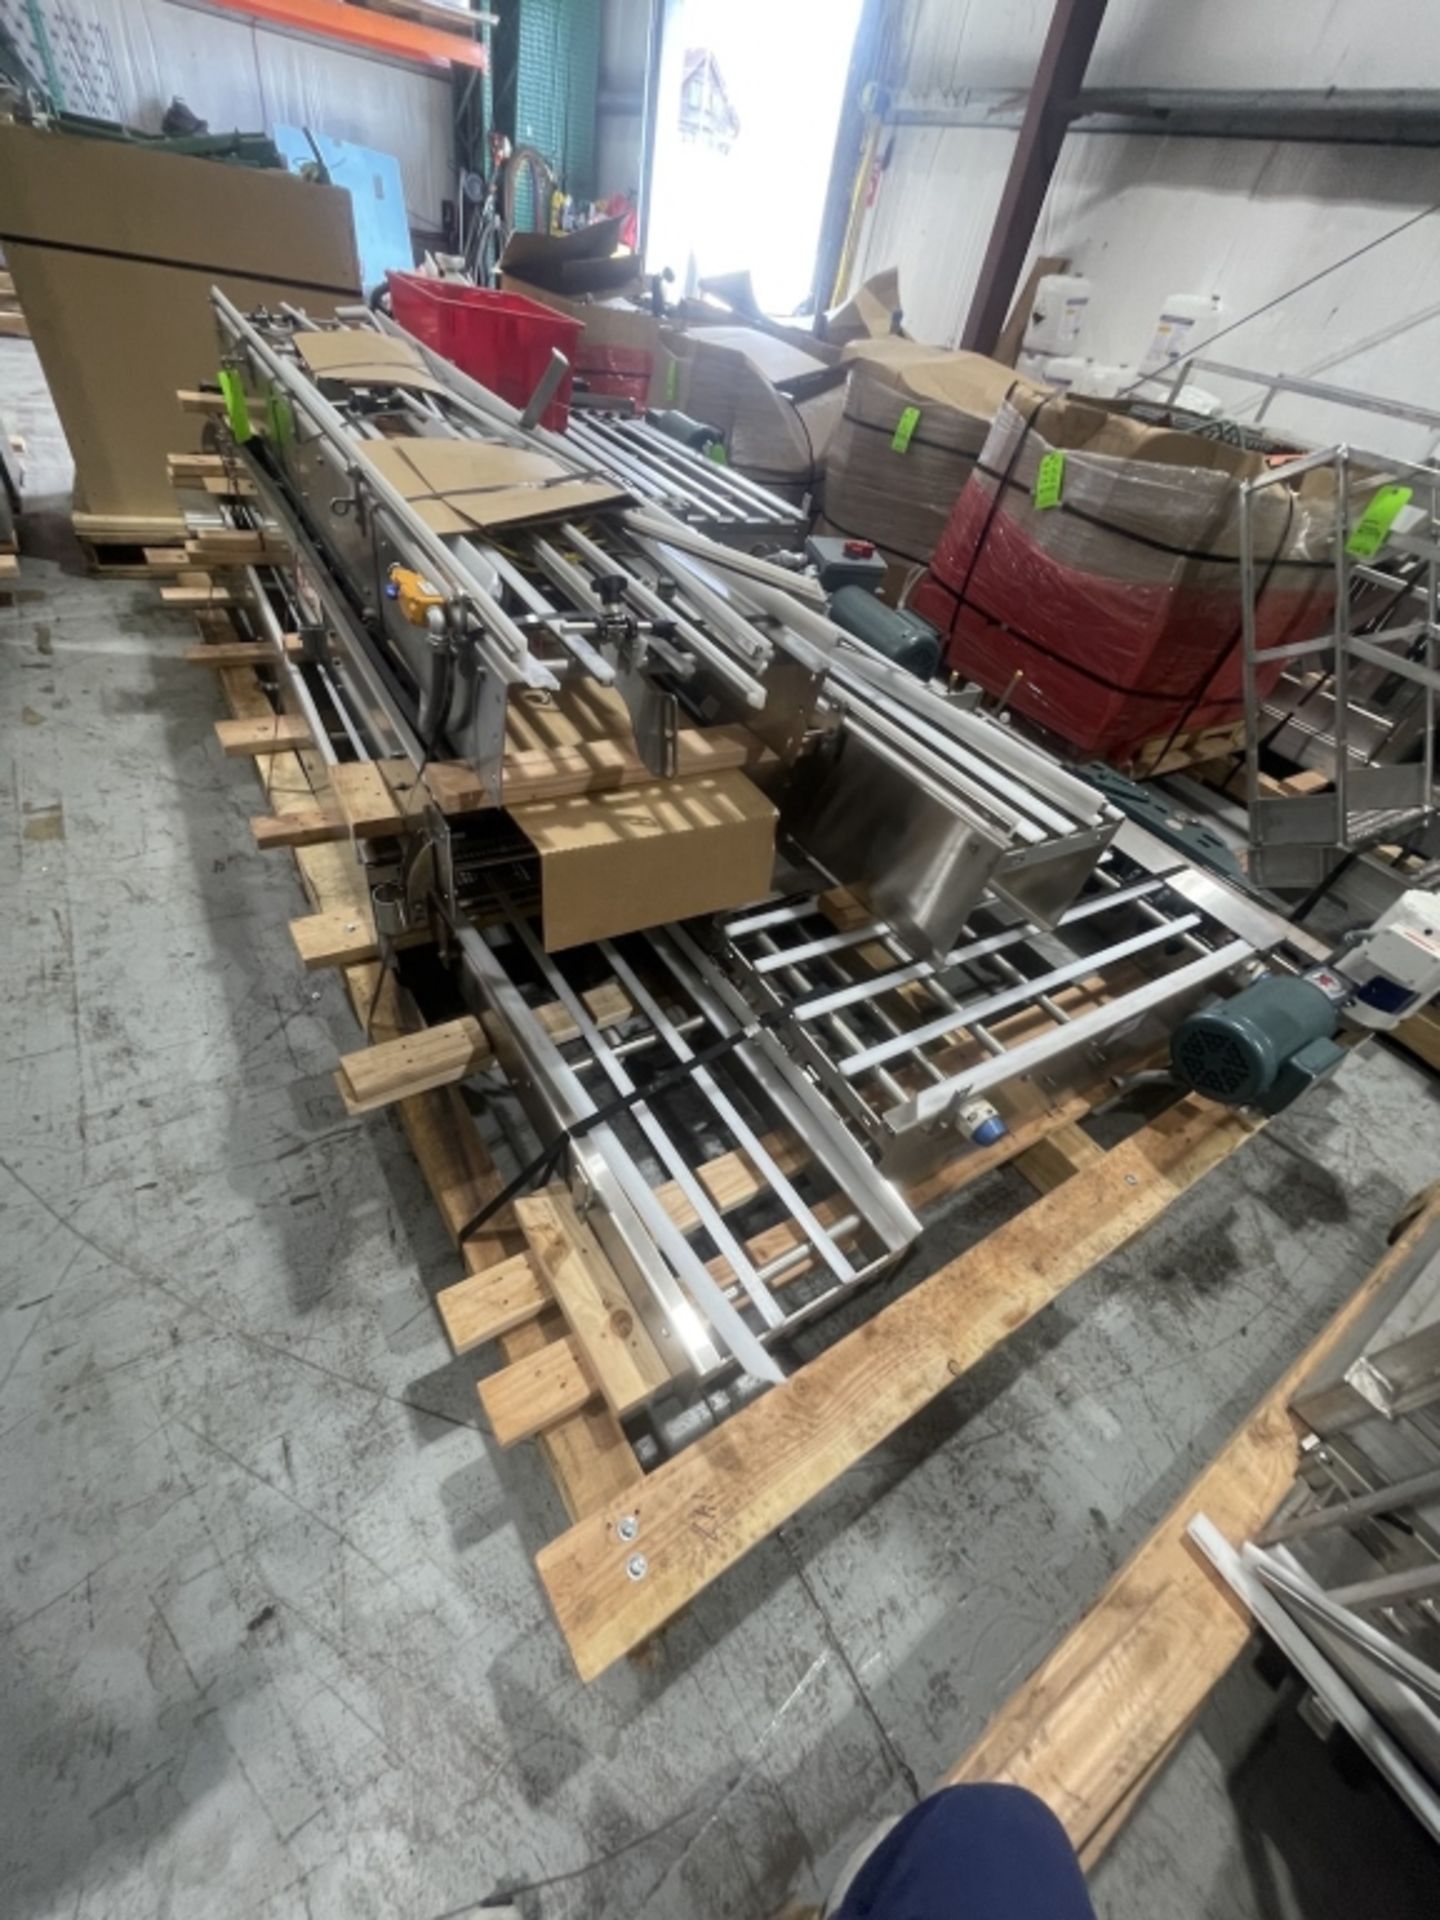 CAN CONVEYOR SYSTEMS (2019 MFG)(INV#83149) (Loading, Handling & Site Management Fee: $1250.00) - Image 8 of 11